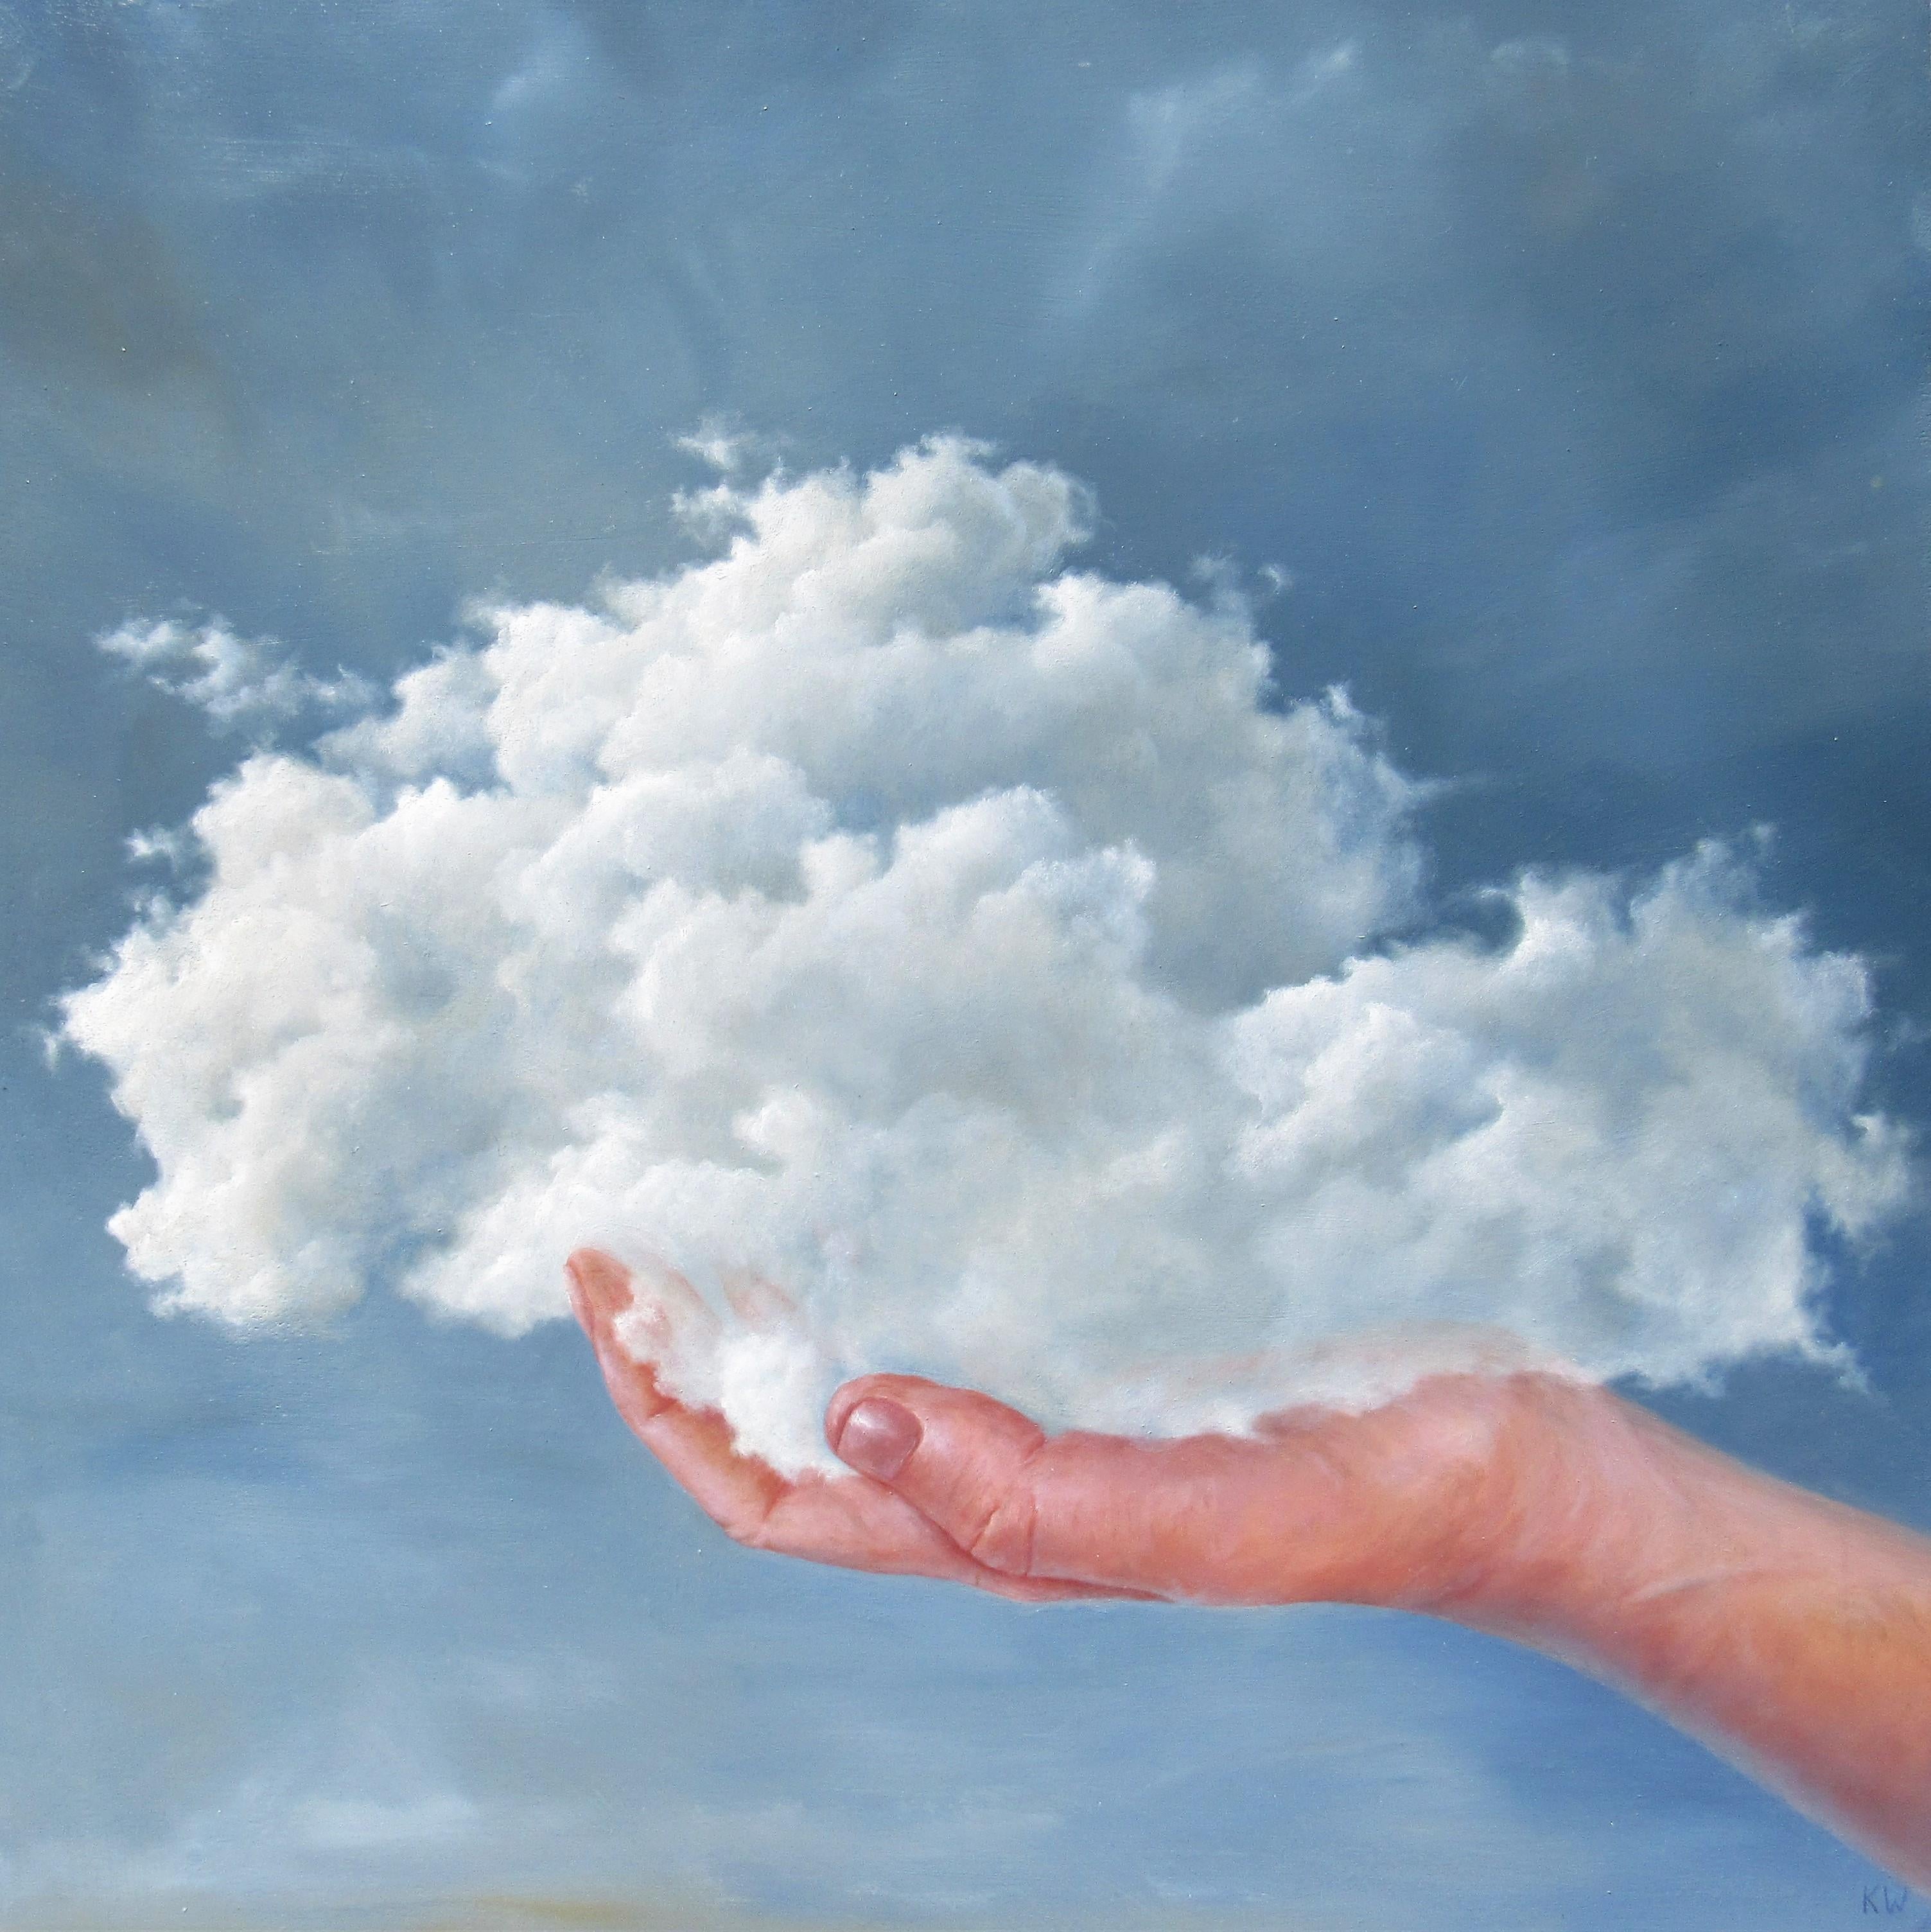 hold me in your hand like a cloud - Painting by Kris Wenschuh